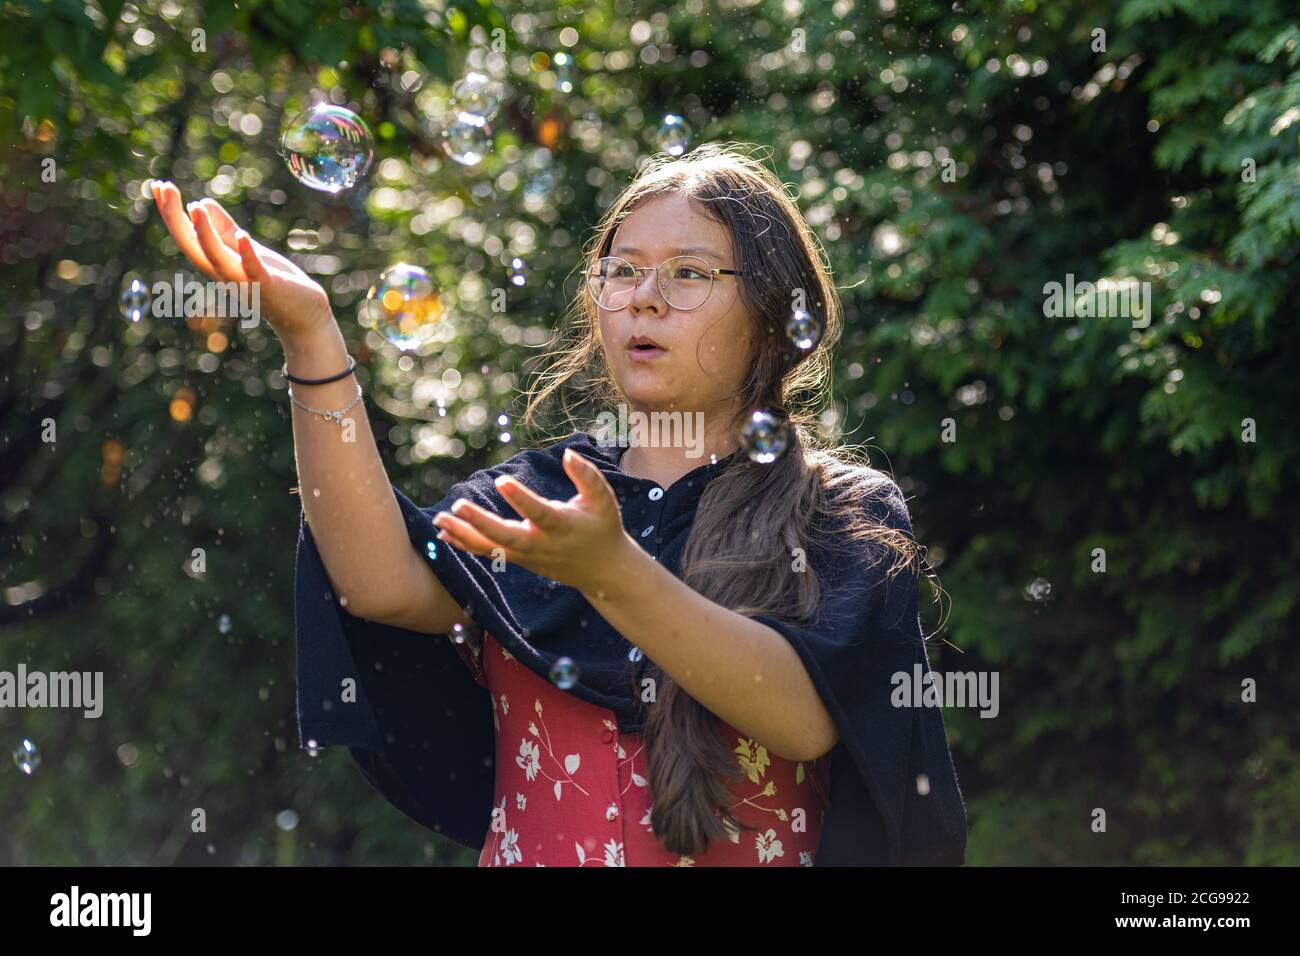 Closeup picture of a middle-aged, in her 50s, Asian woman with soap bubbles. Green leaves in the background Stock Photo